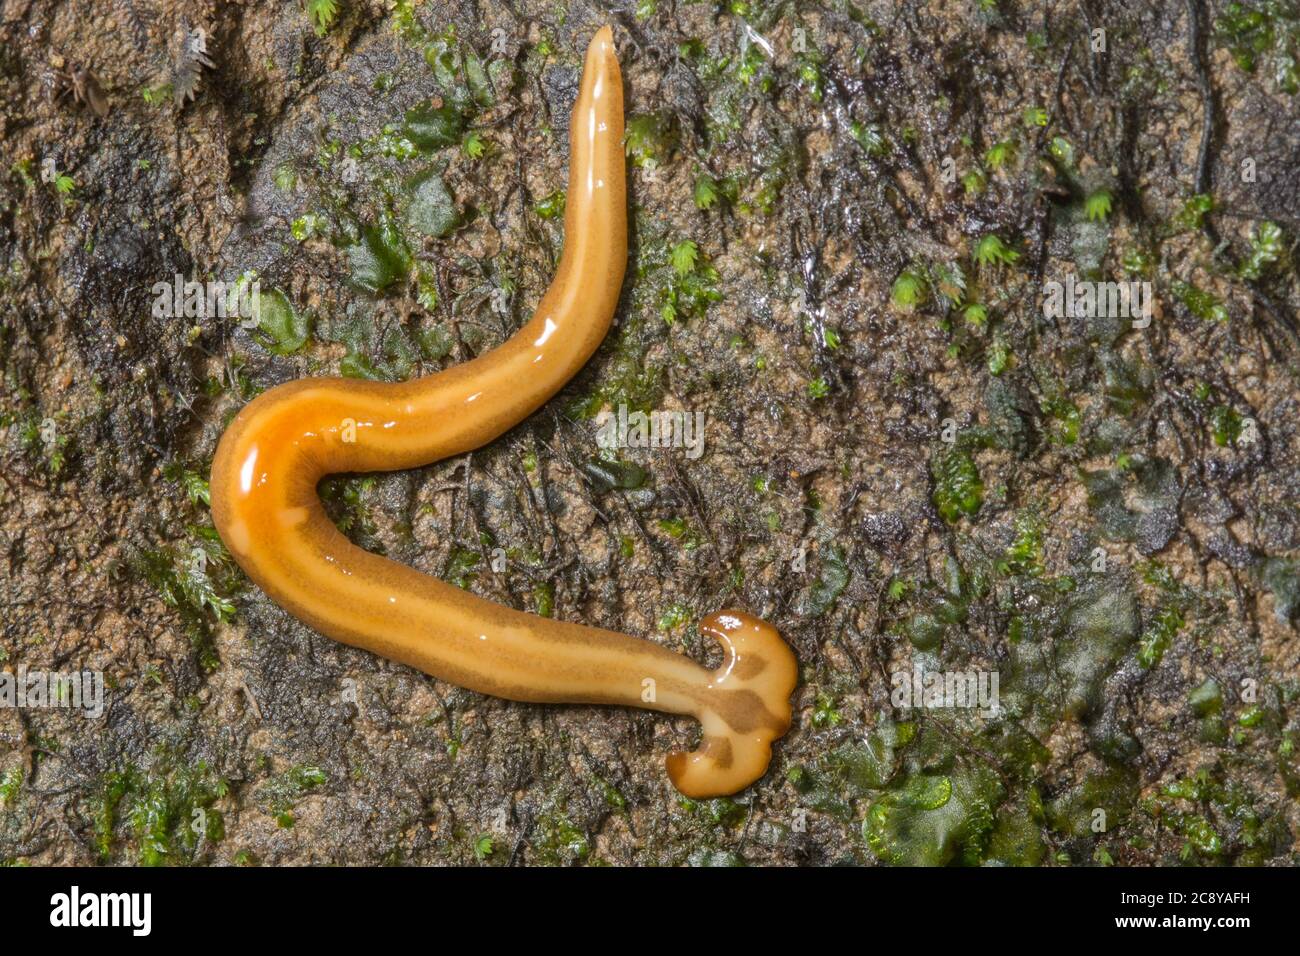 A hammerhead flatworm (Bipalium species) from the jungles of Borneo. Stock Photo